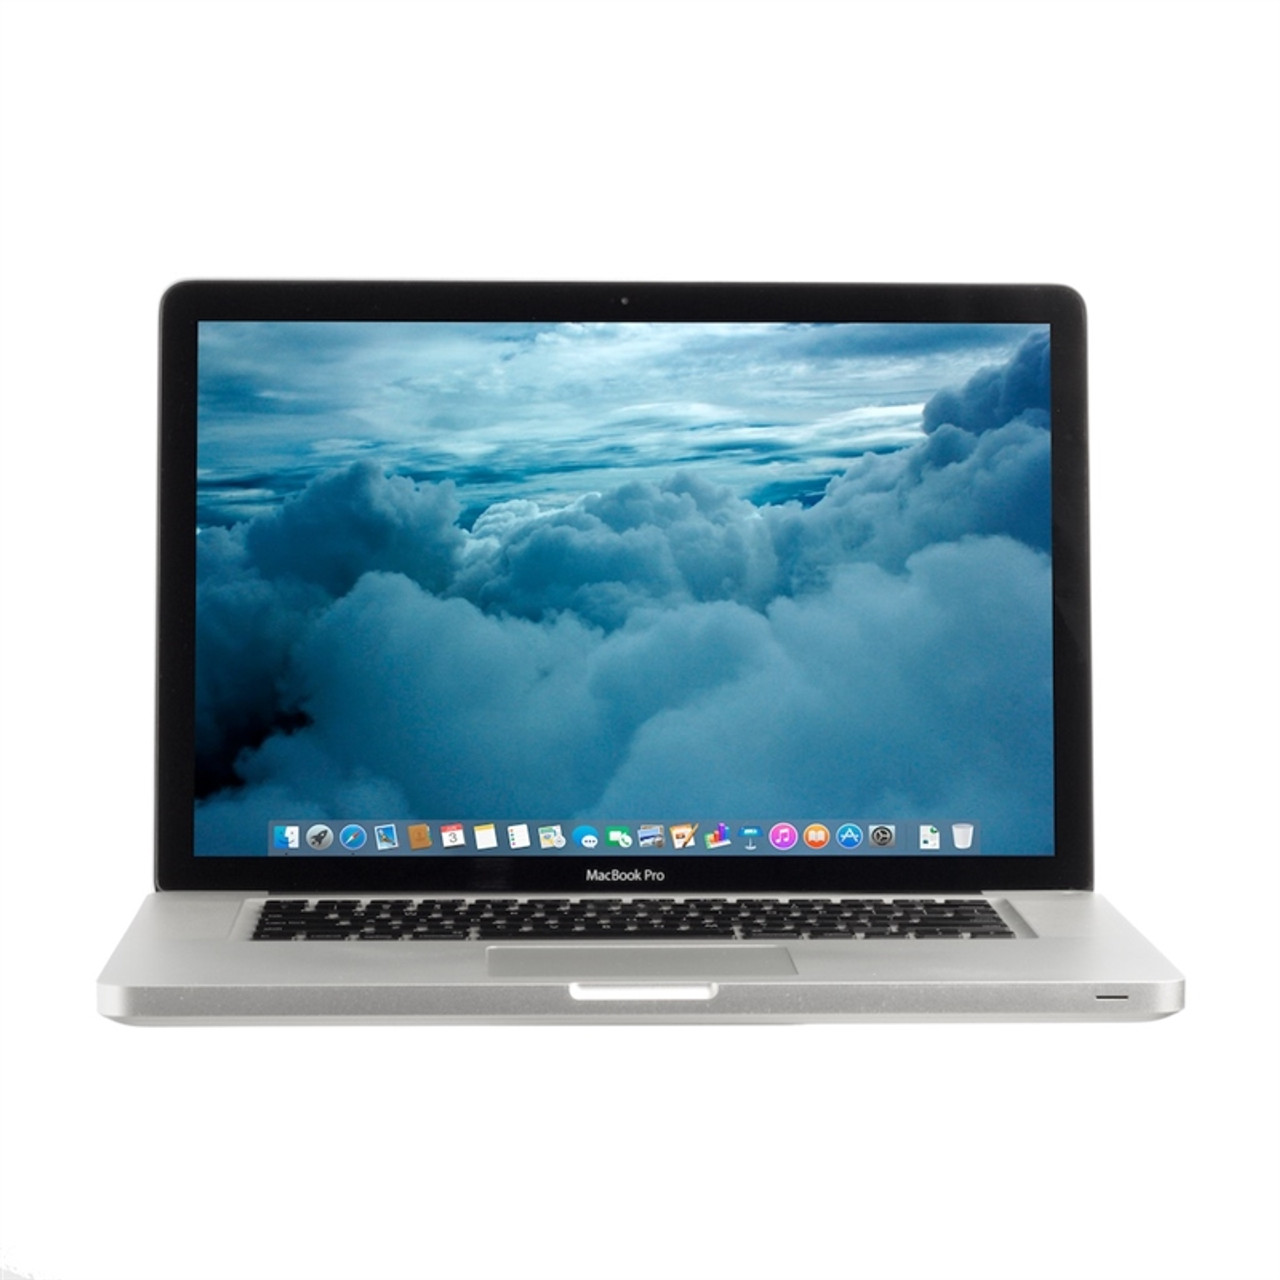 Apple MacBook Pro 15-inch (Glossy) 2.93GHz Core 2 Duo (Late 2008) MC026LL/A  - Good Condition